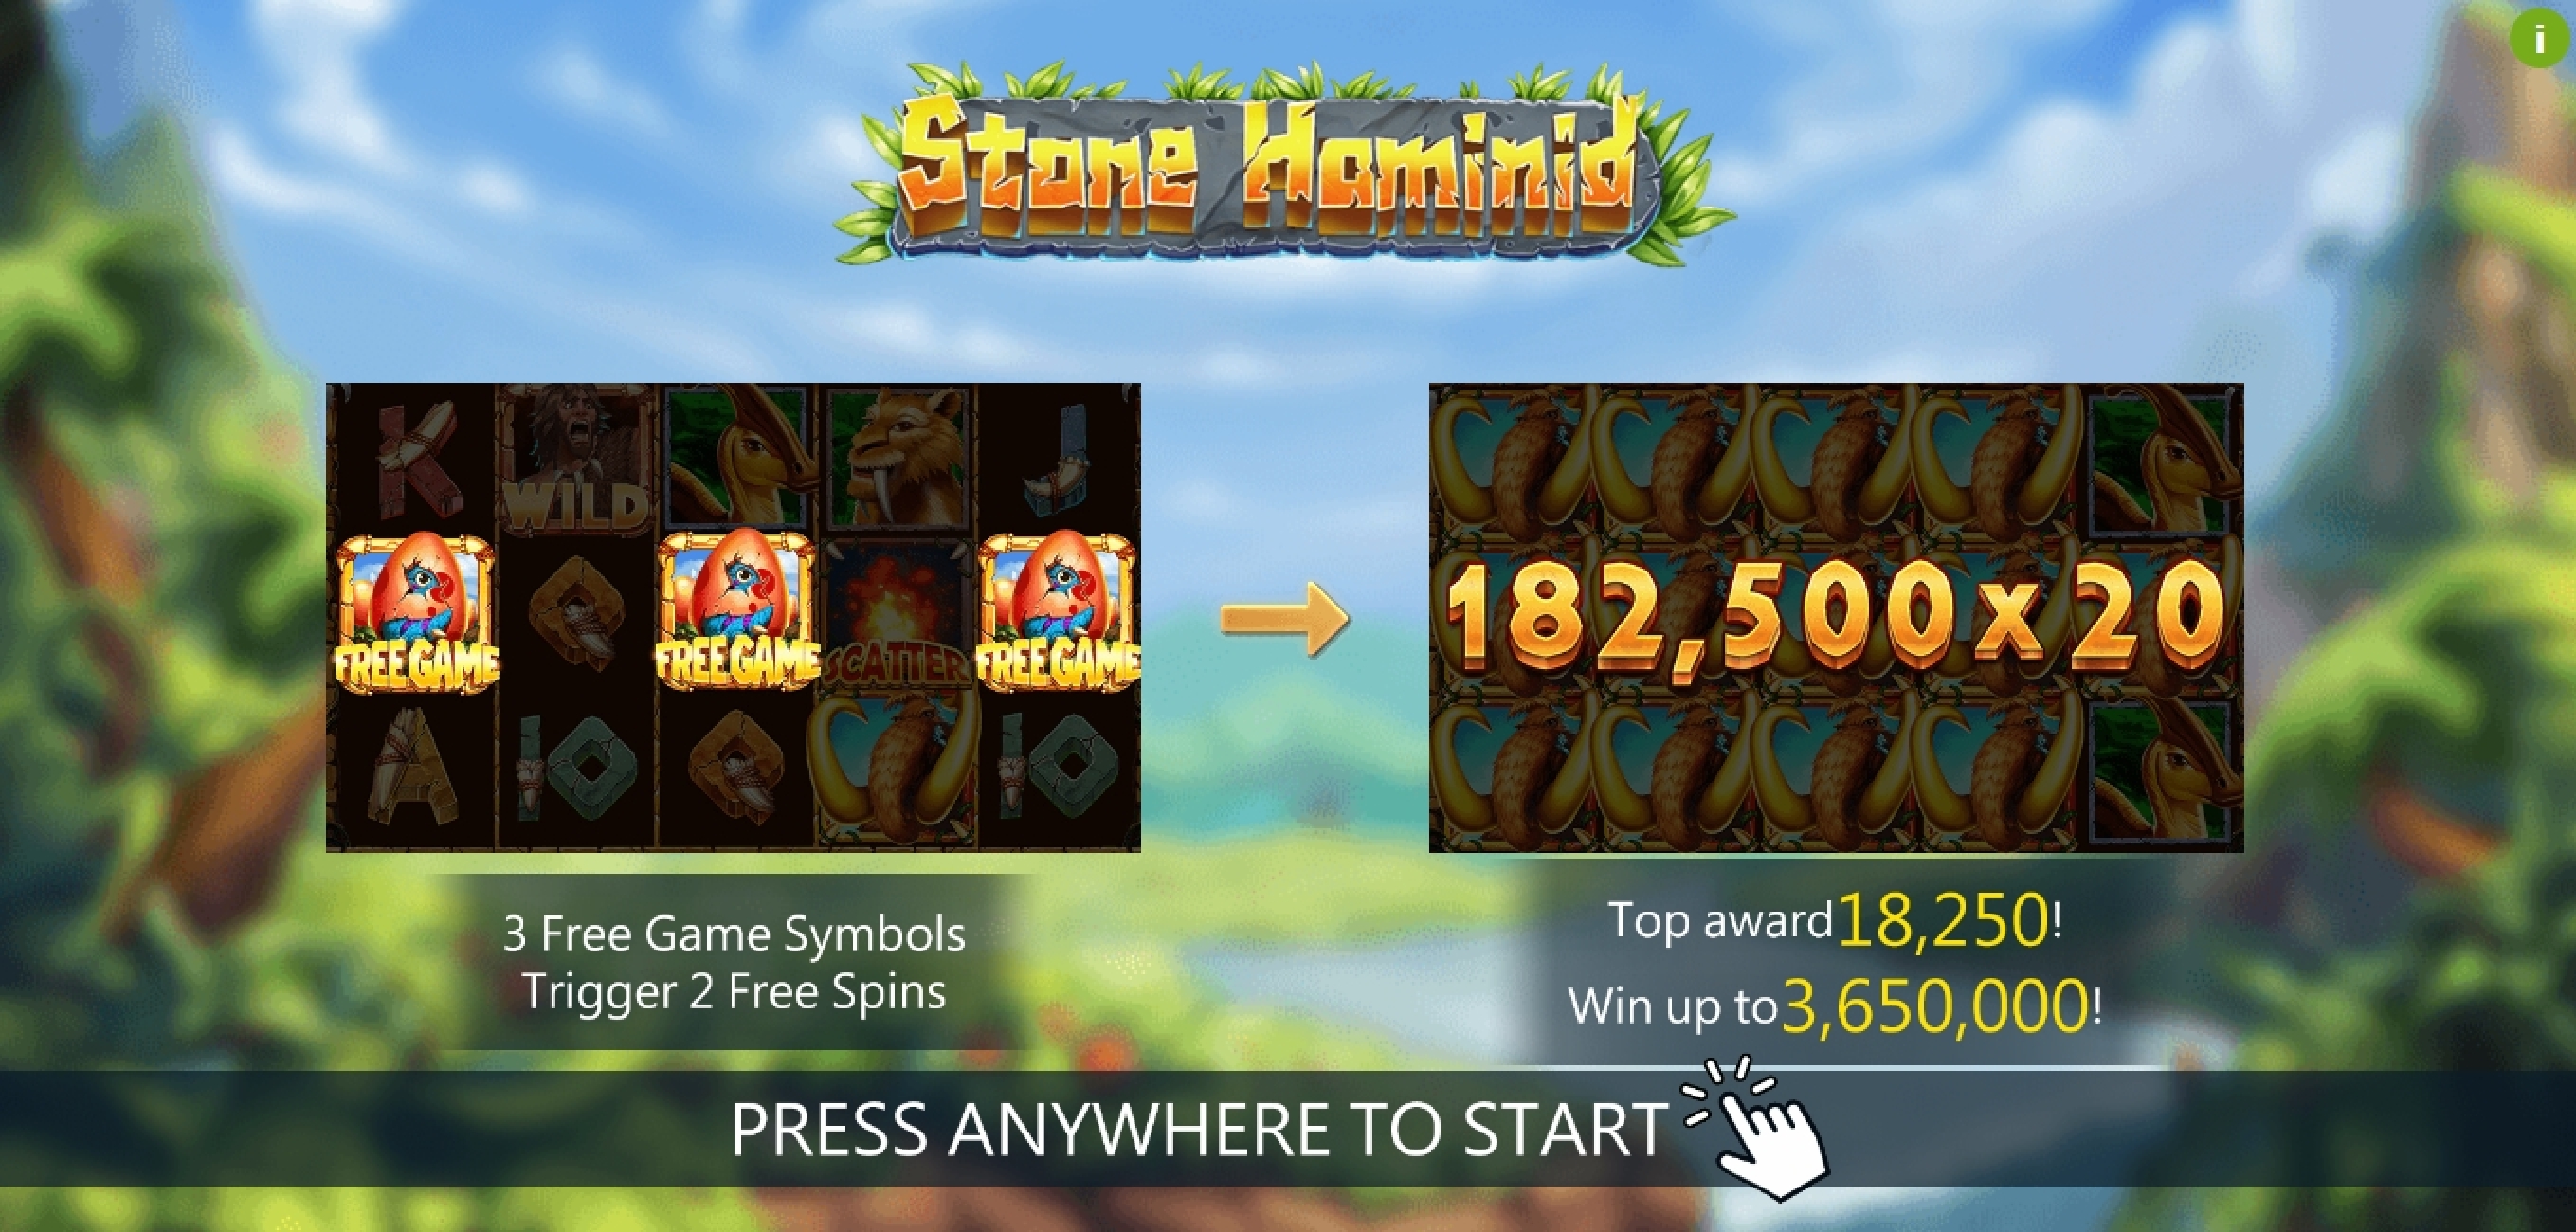 Play Stone Hominid Free Casino Slot Game by Dragoon Soft